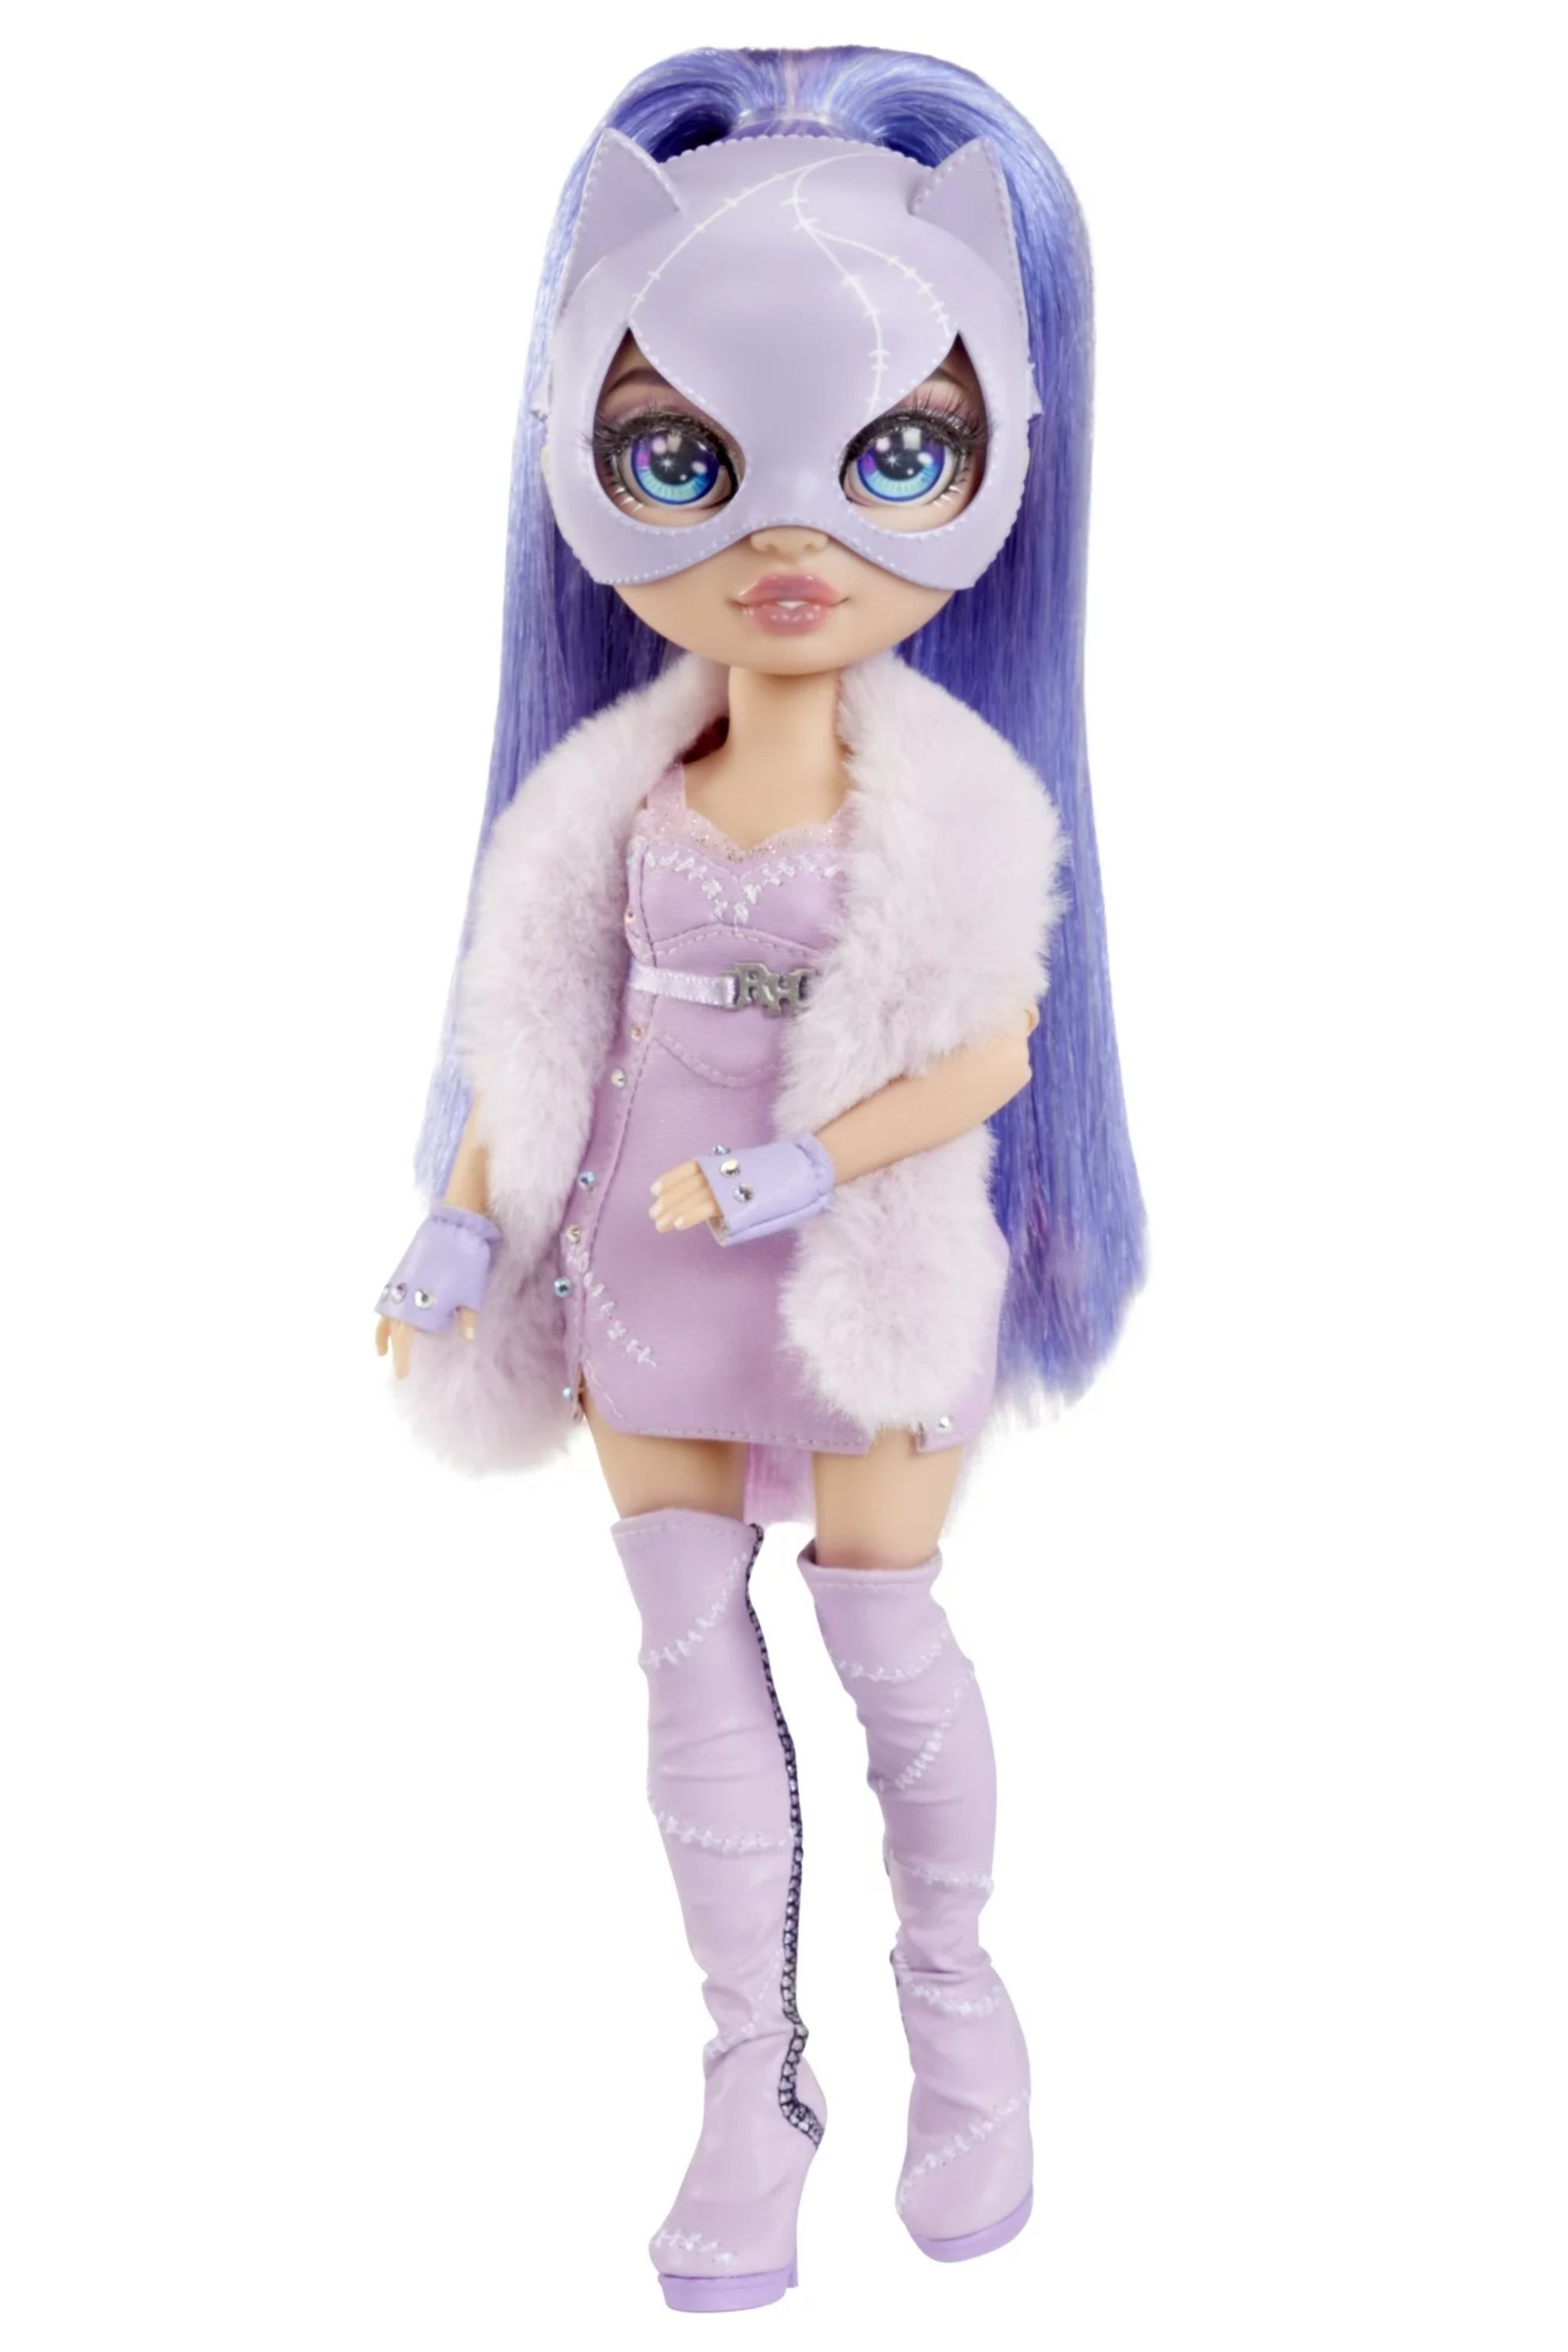 Popular Rainbow High now has a rival - the Shadow High dolls that you can  pre-order 